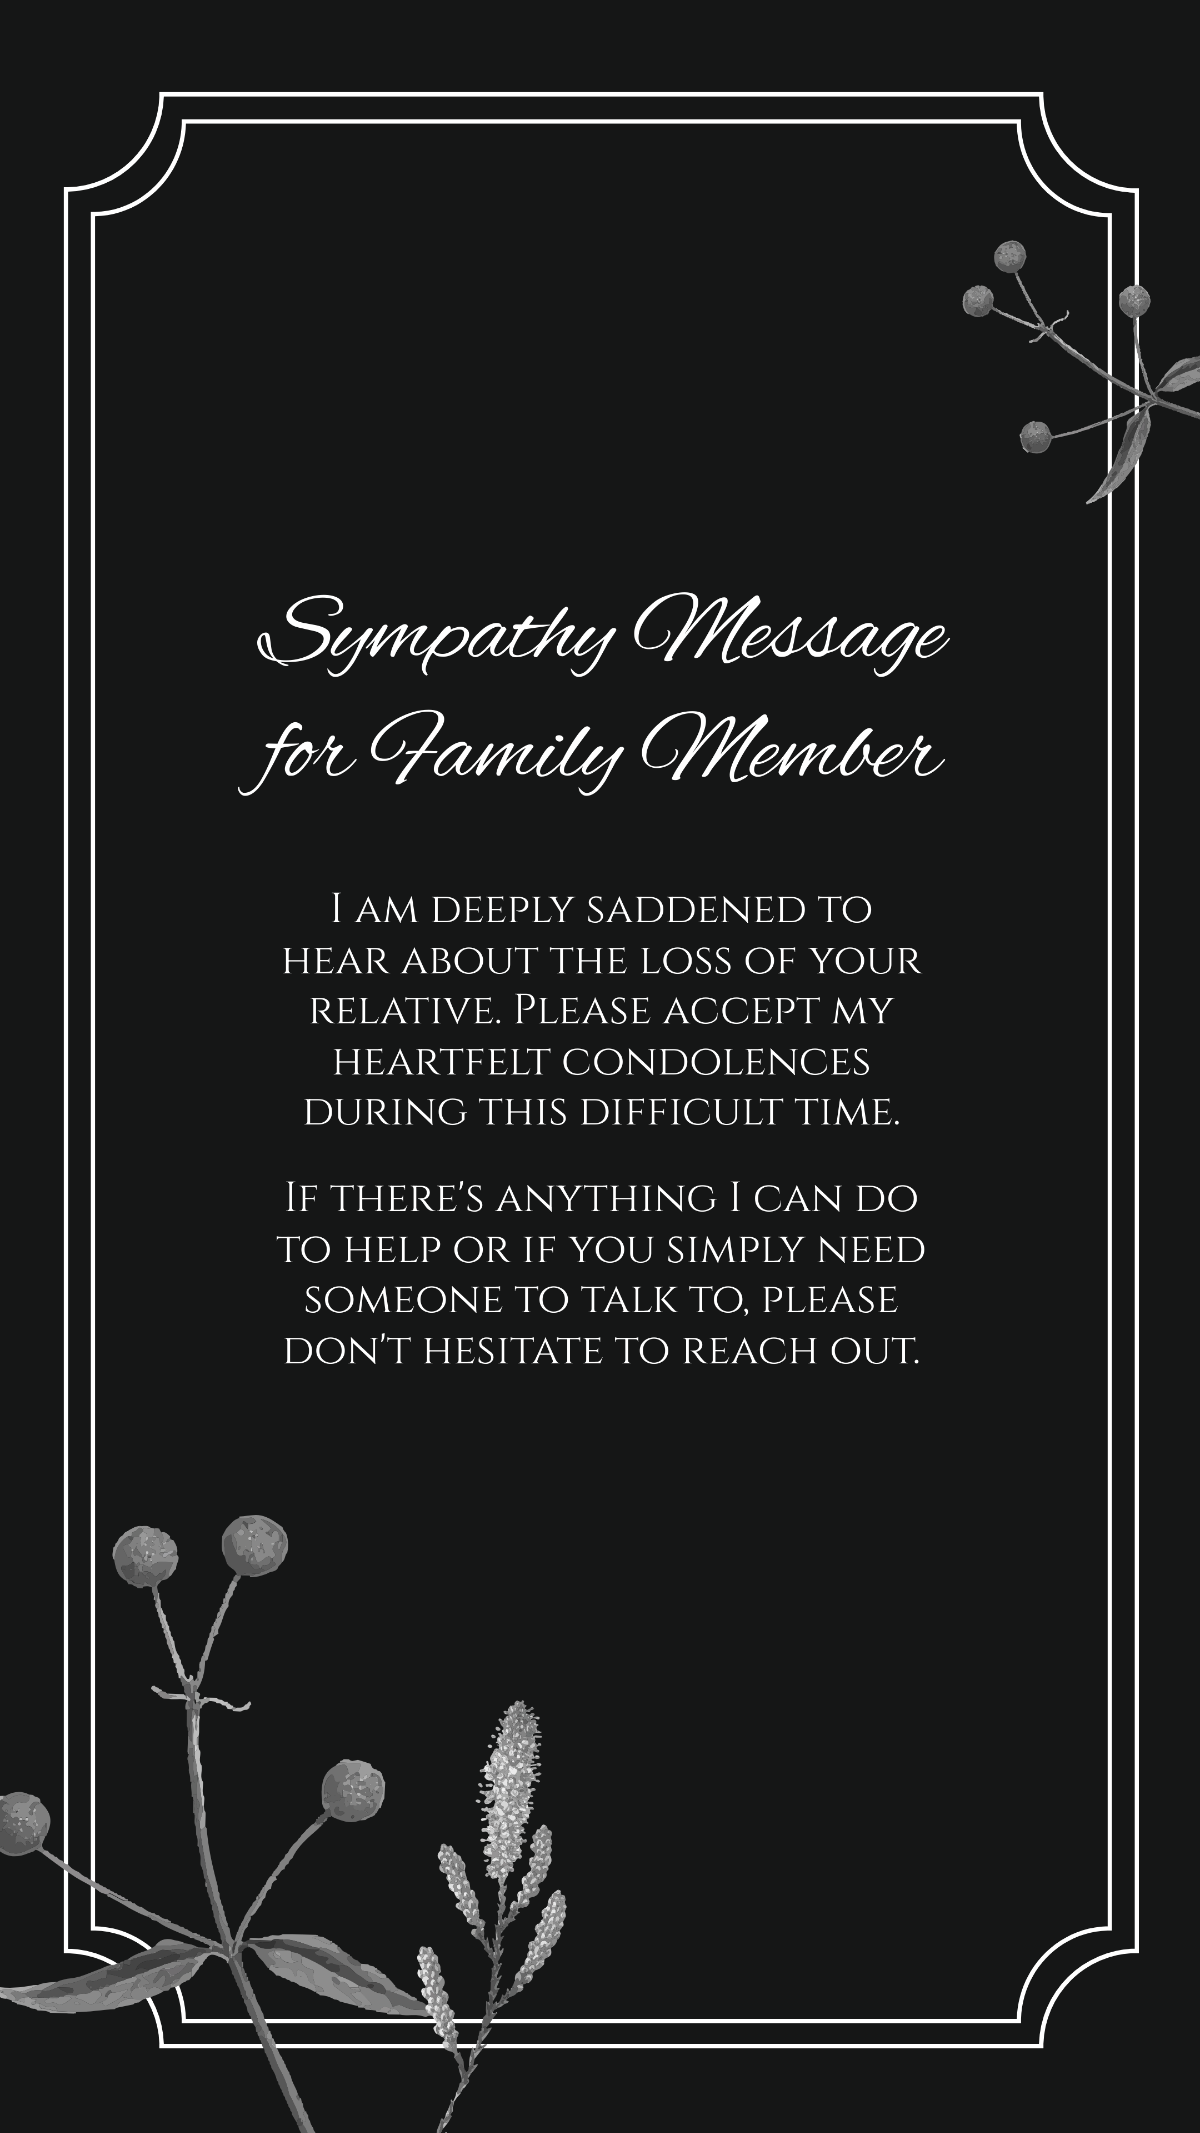 Sympathy message for Family Member